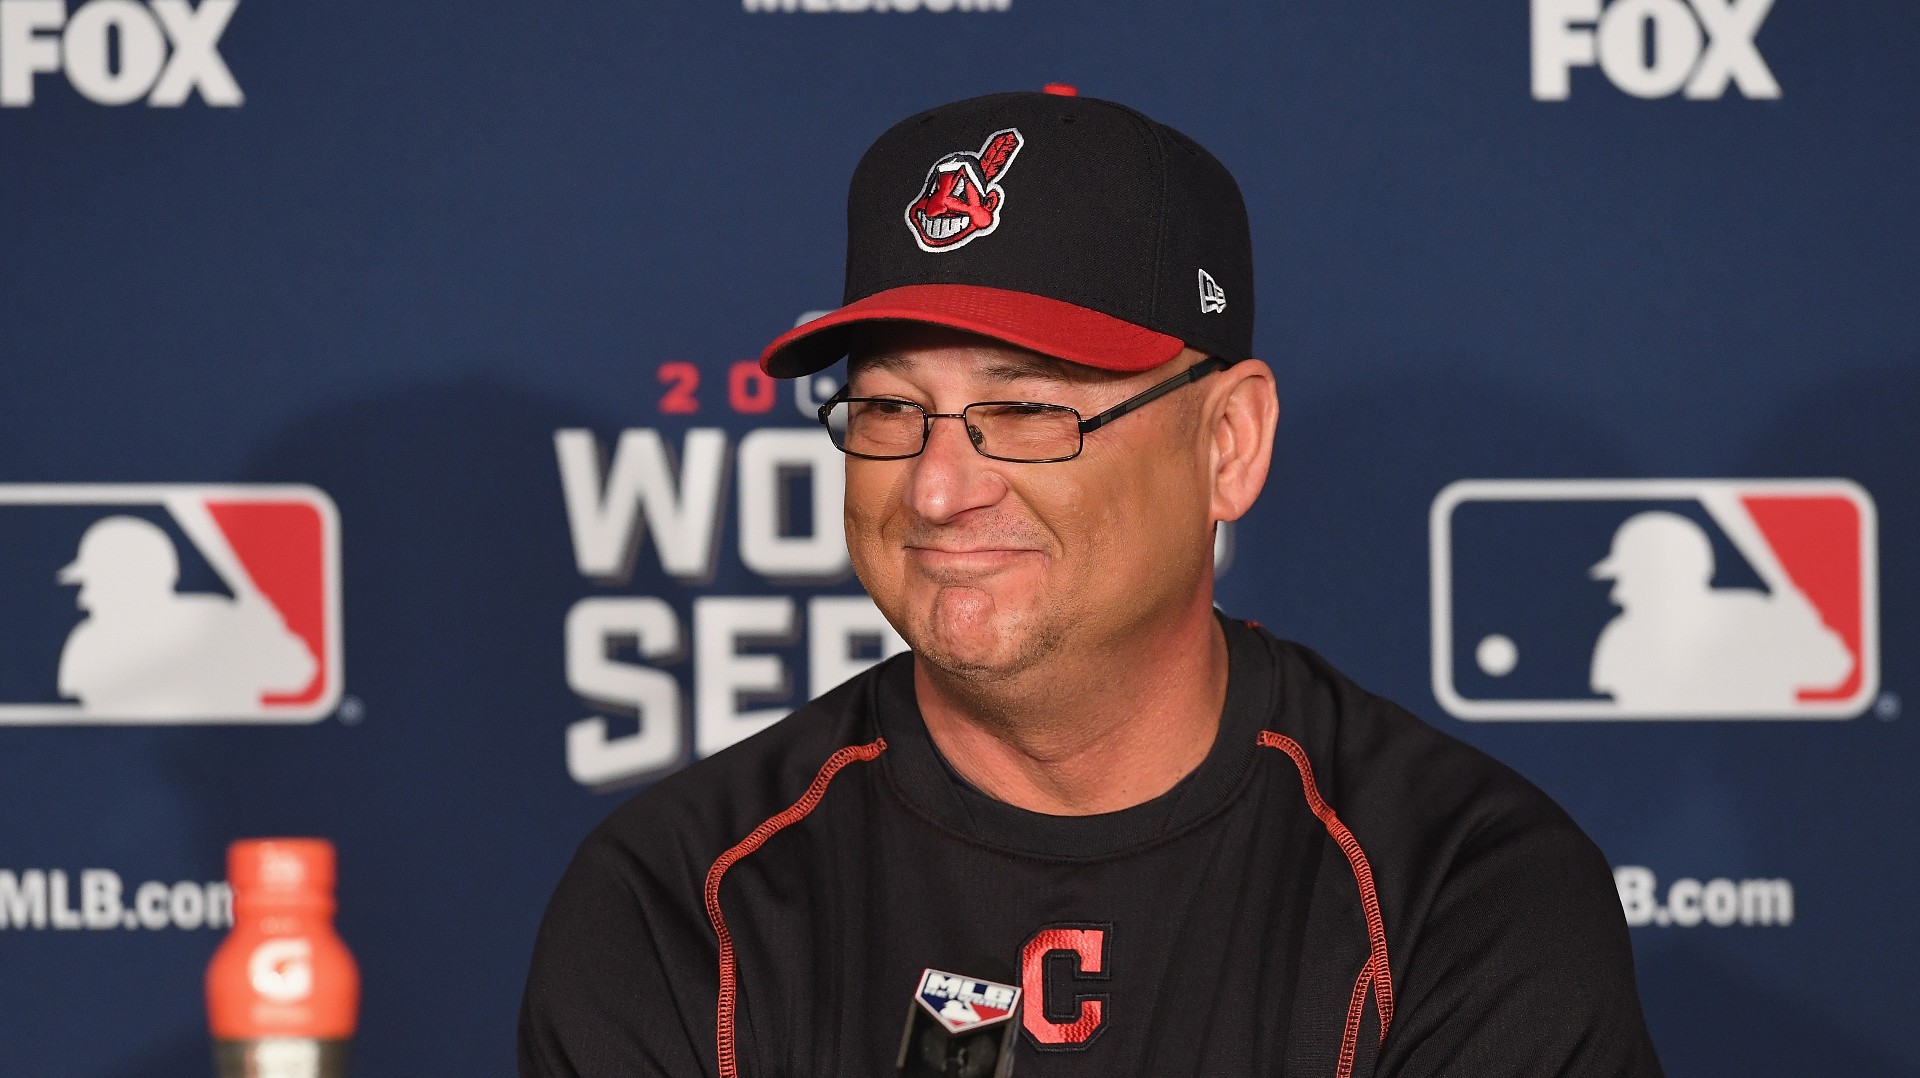 Indians manager Terry Francona still in hospital undergoing tests